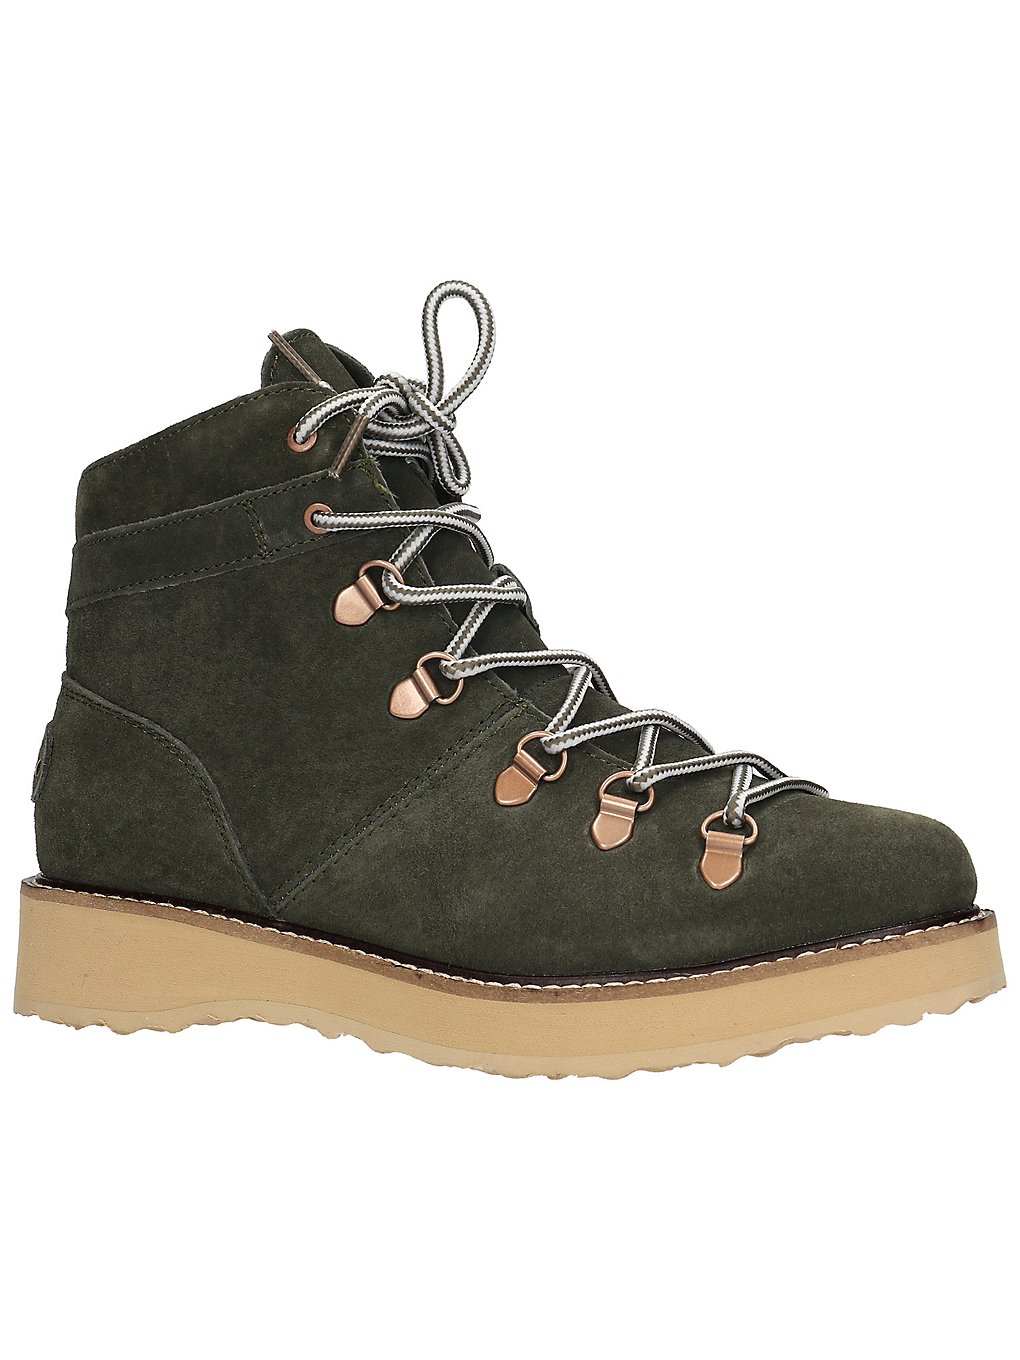 Roxy Spencir Boots olive